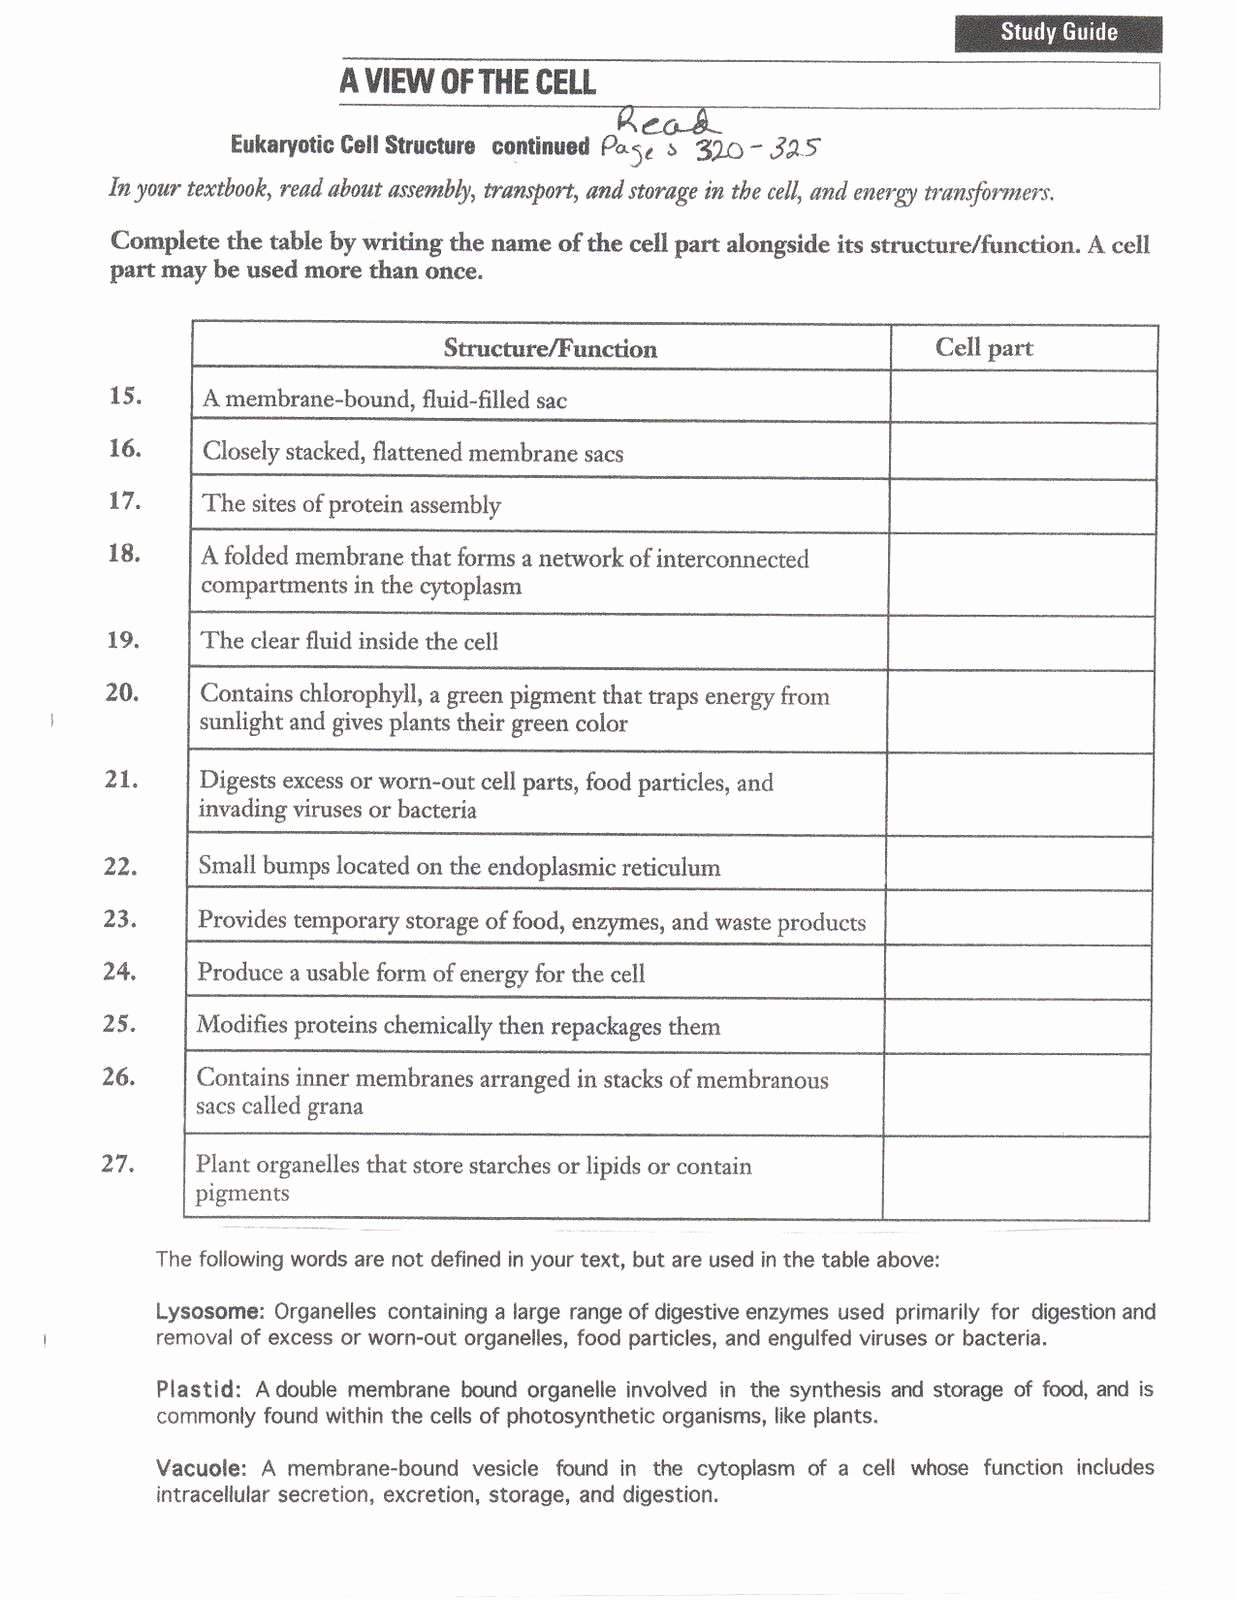 Animal Cell Worksheet Answers Fresh Cell organelles and their Functions Worksheet Answers